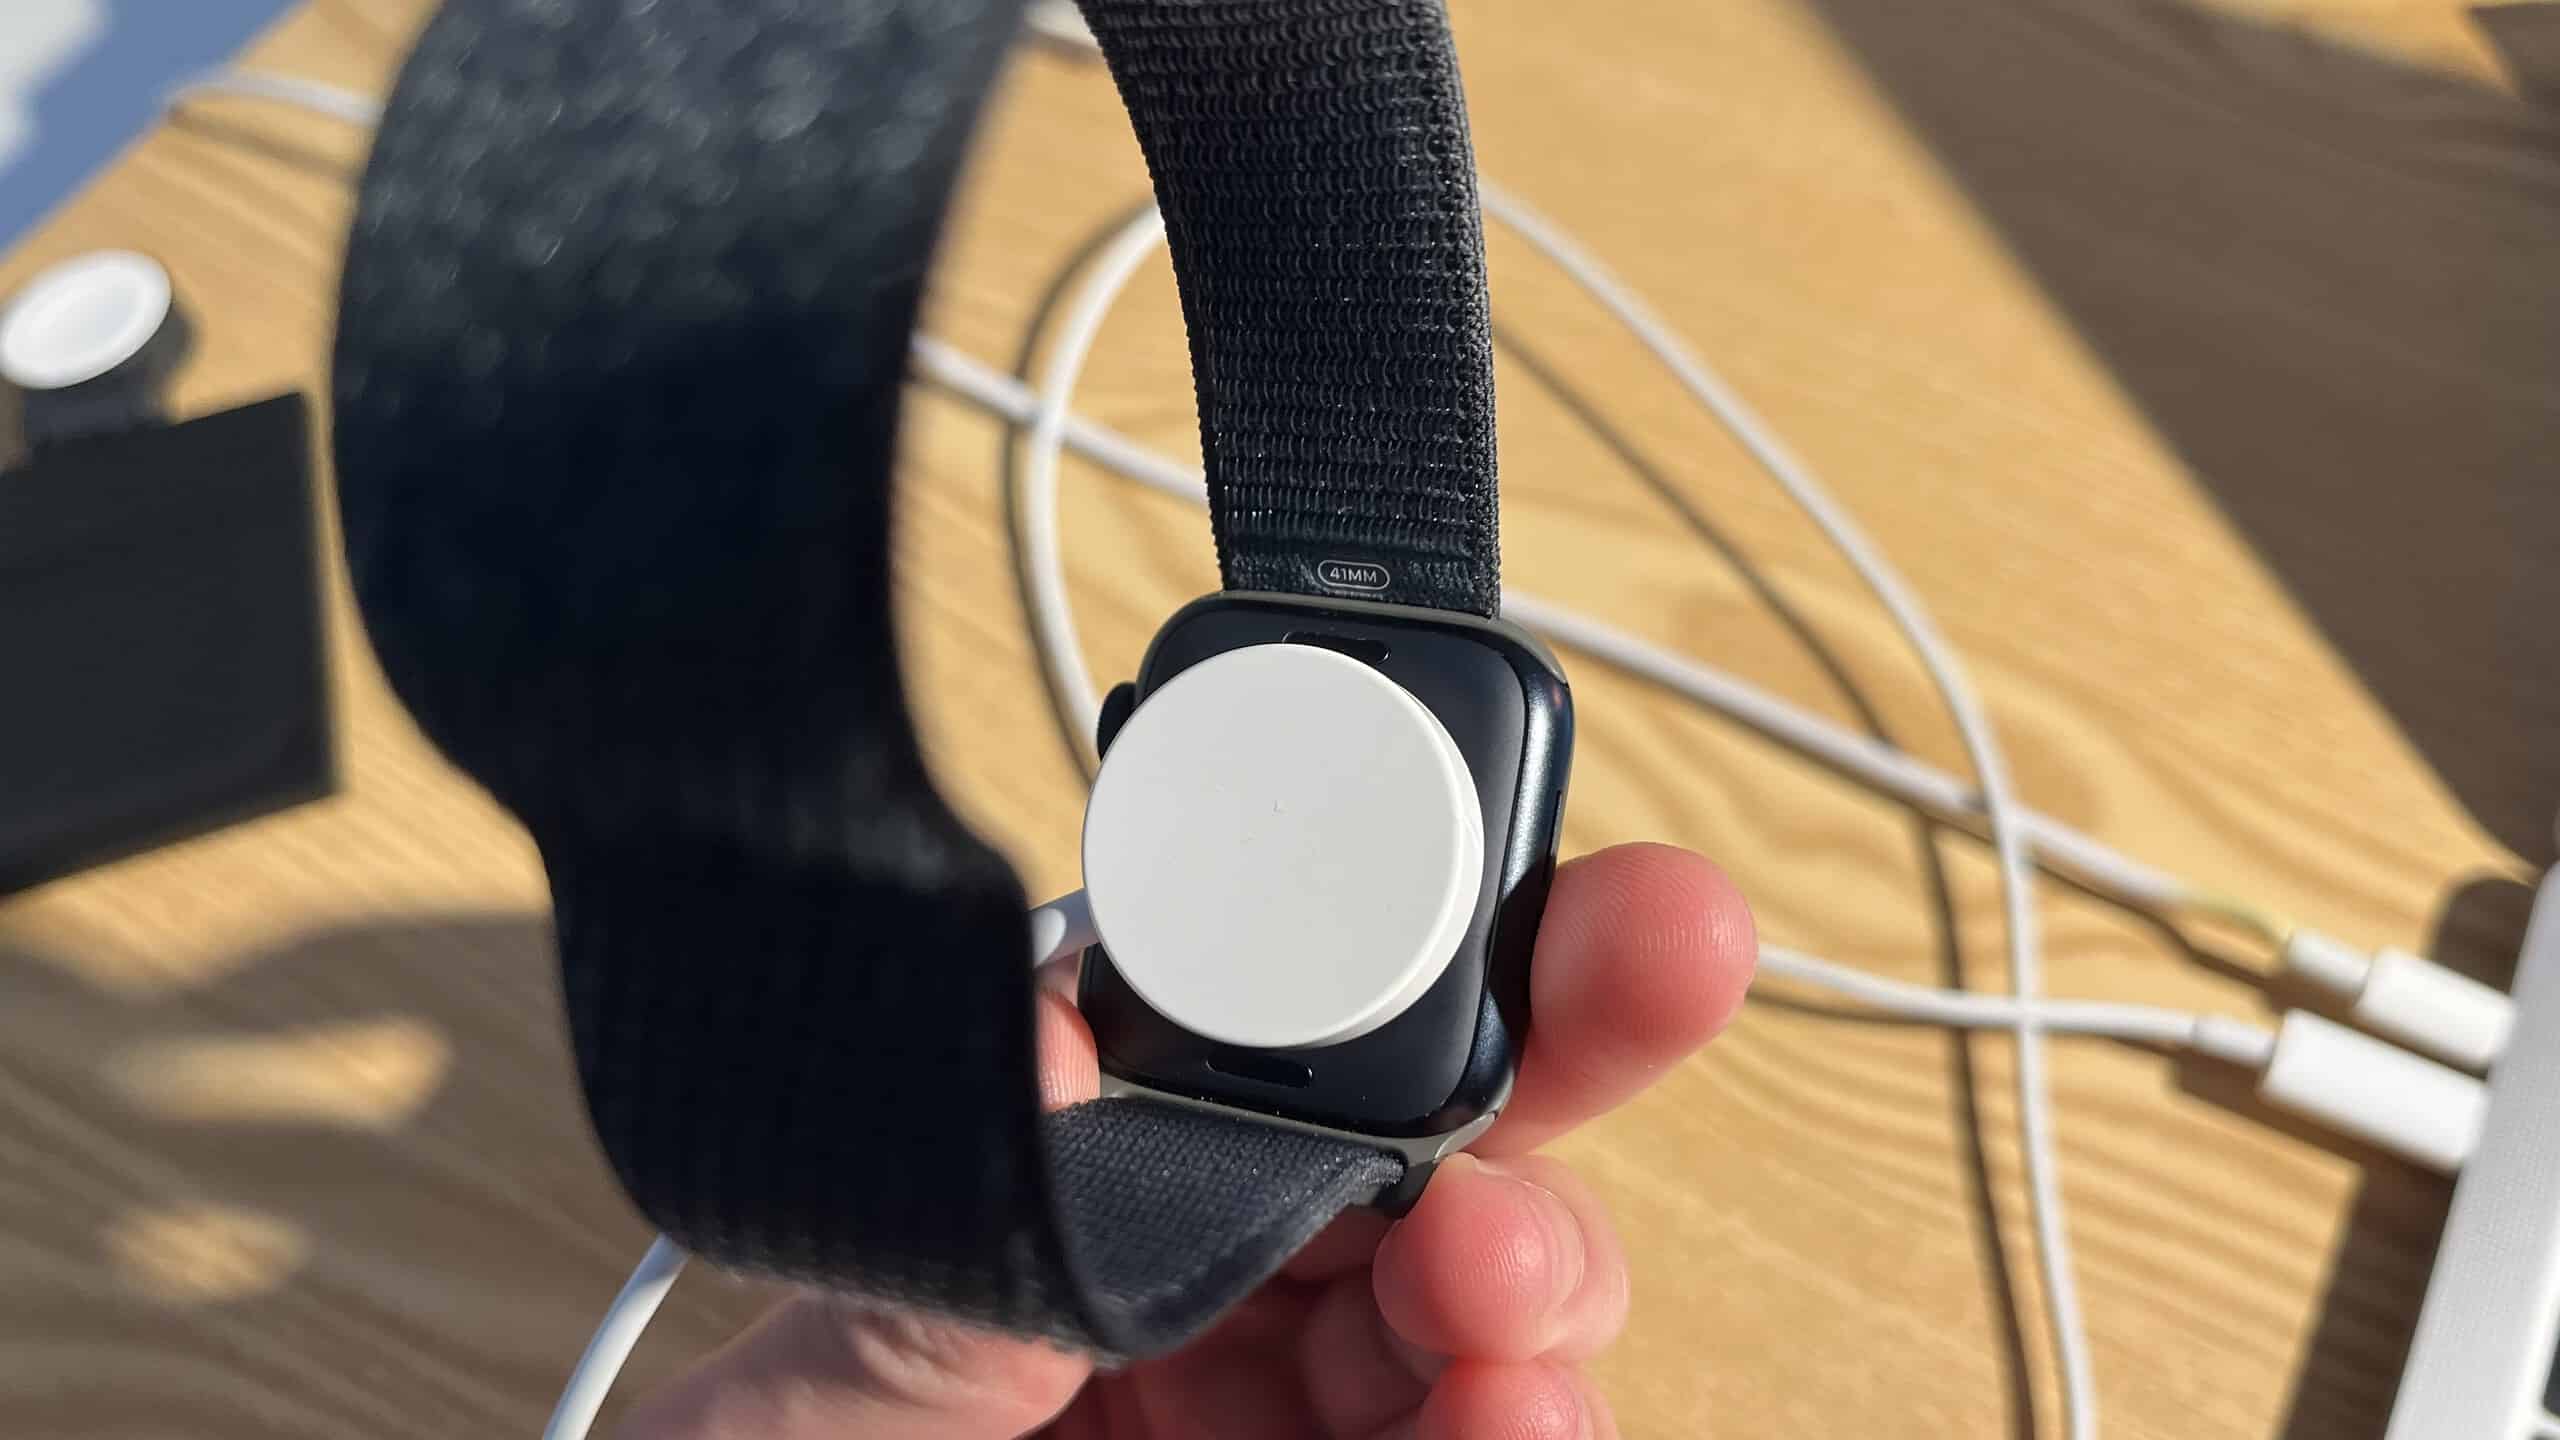 What the back of an Apple Watch looks like when it's charging